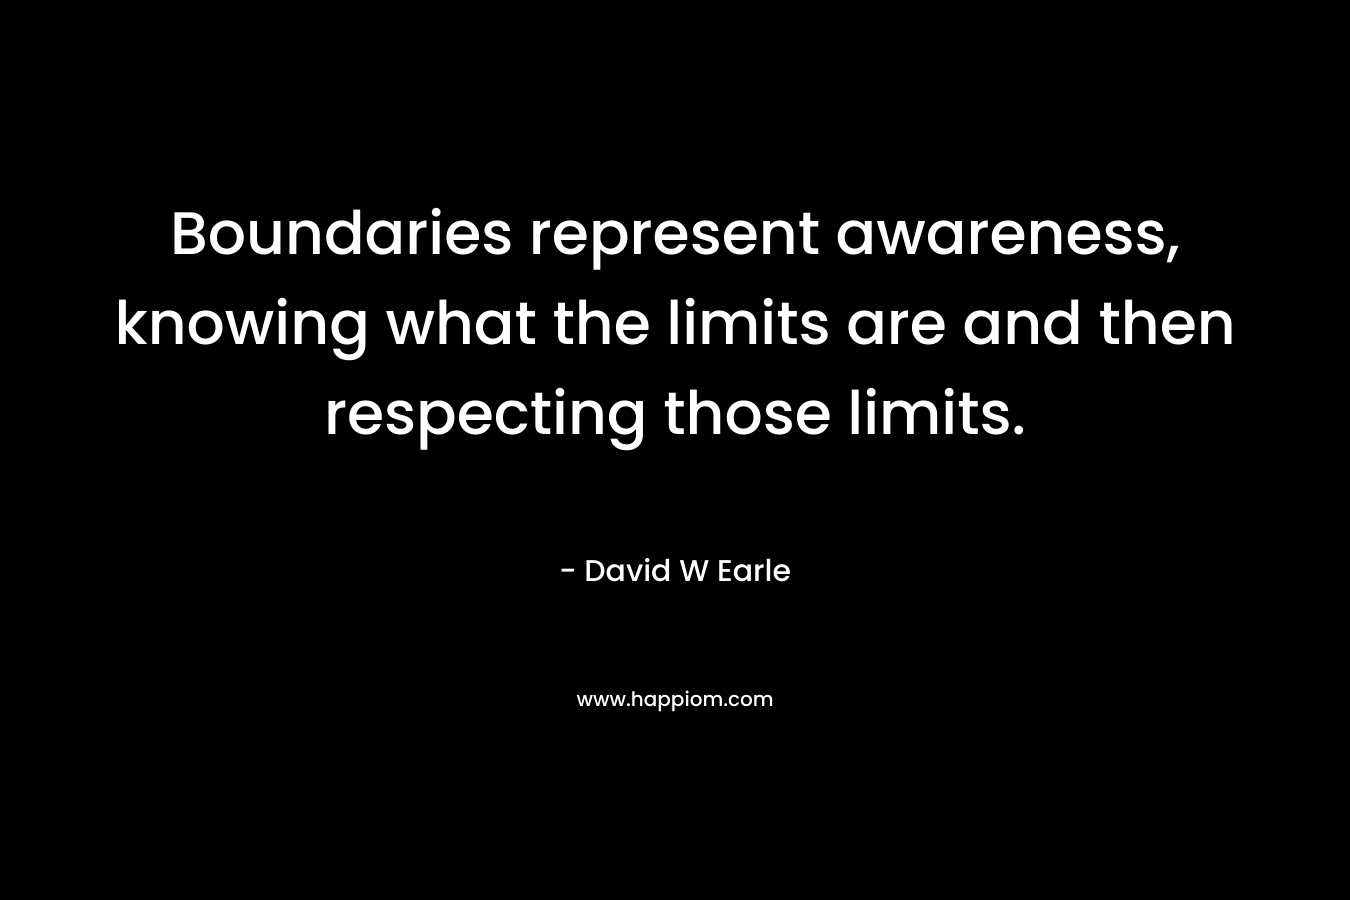 Boundaries represent awareness, knowing what the limits are and then respecting those limits.